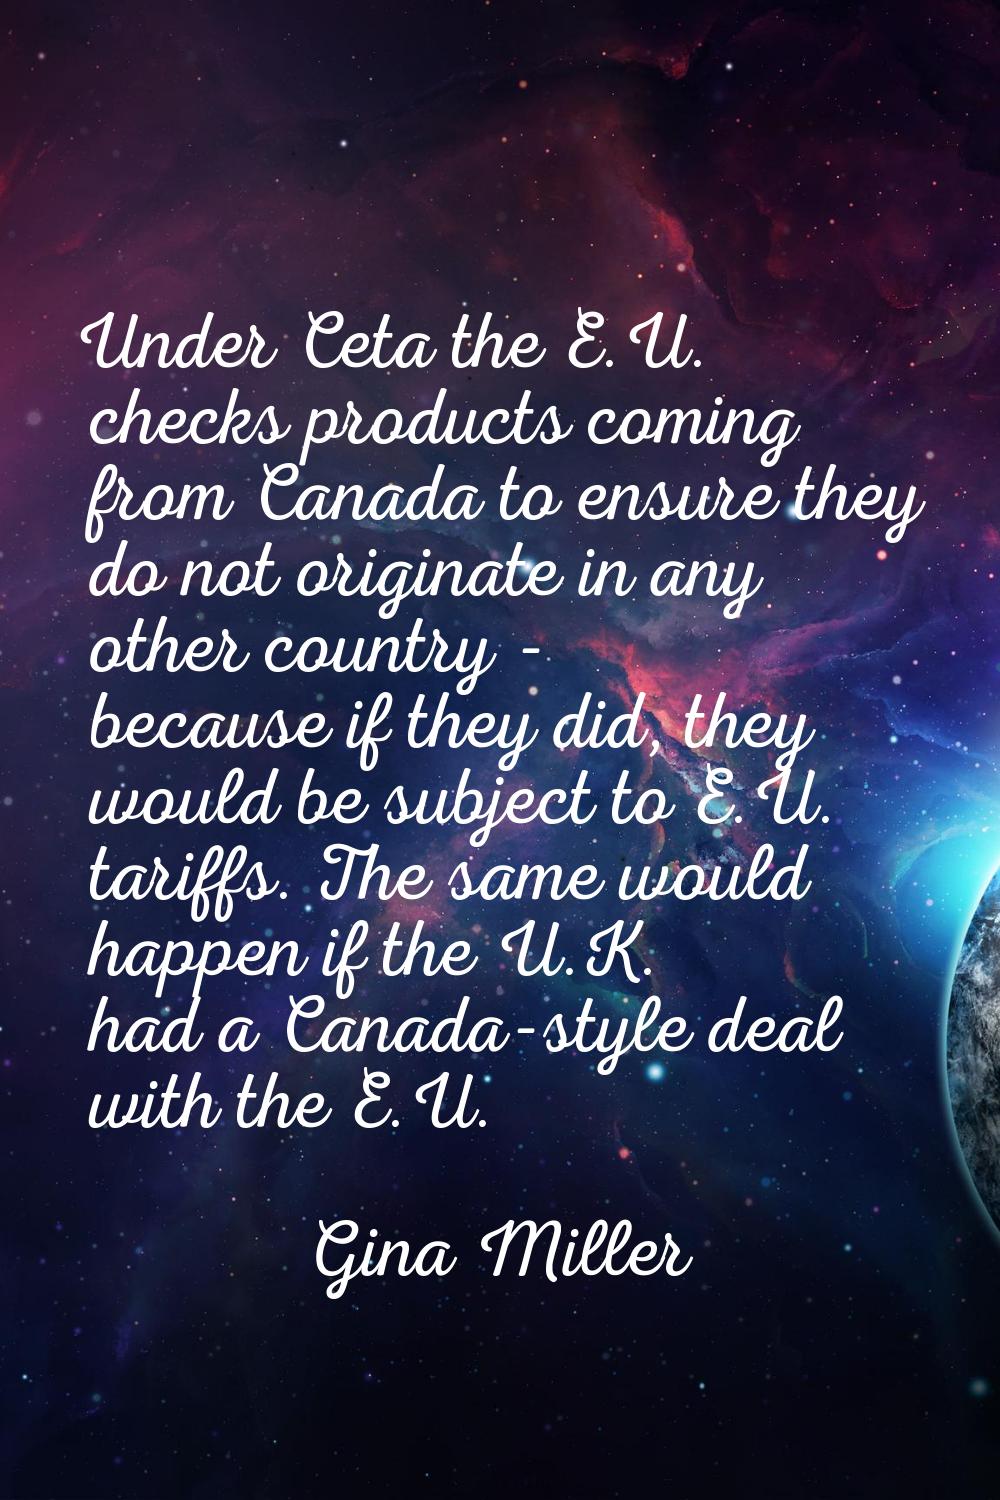 Under Ceta the E.U. checks products coming from Canada to ensure they do not originate in any other